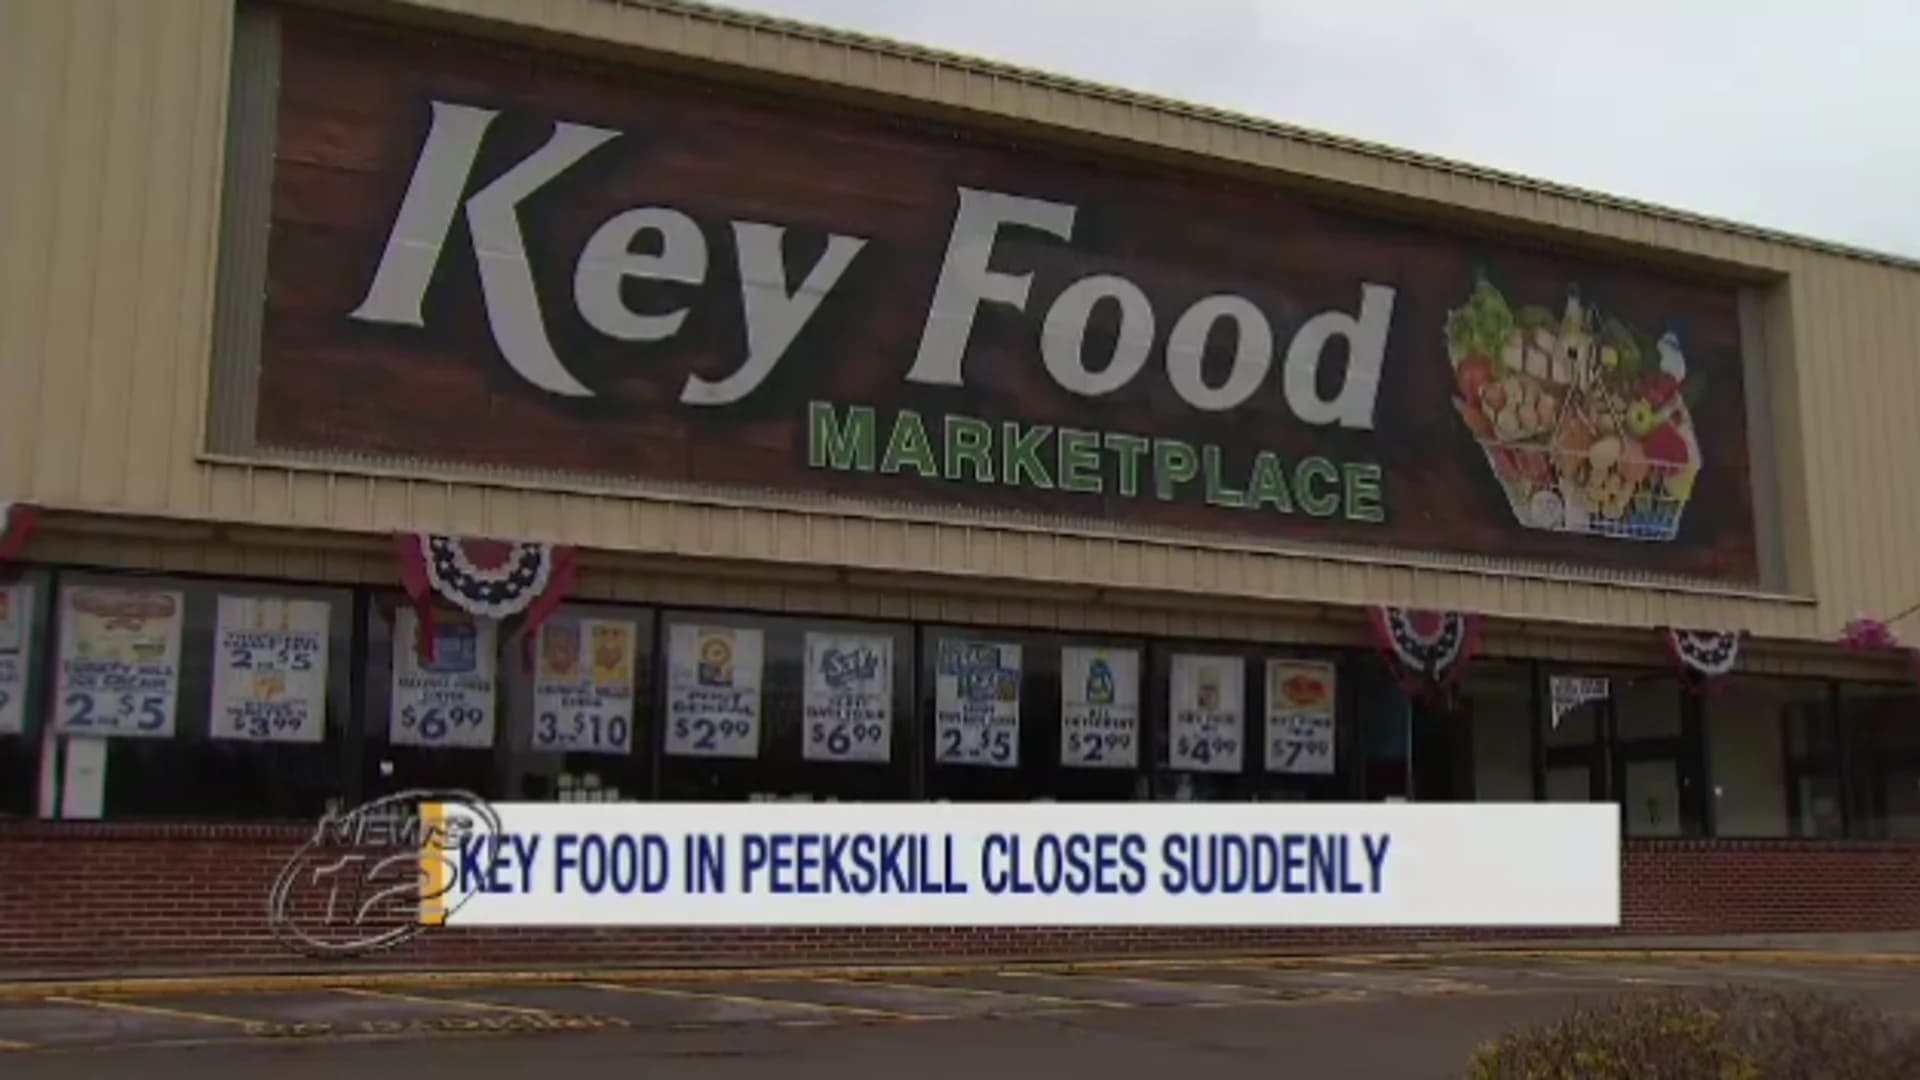 Peekskill grocery store abruptly closes leaving customers confused